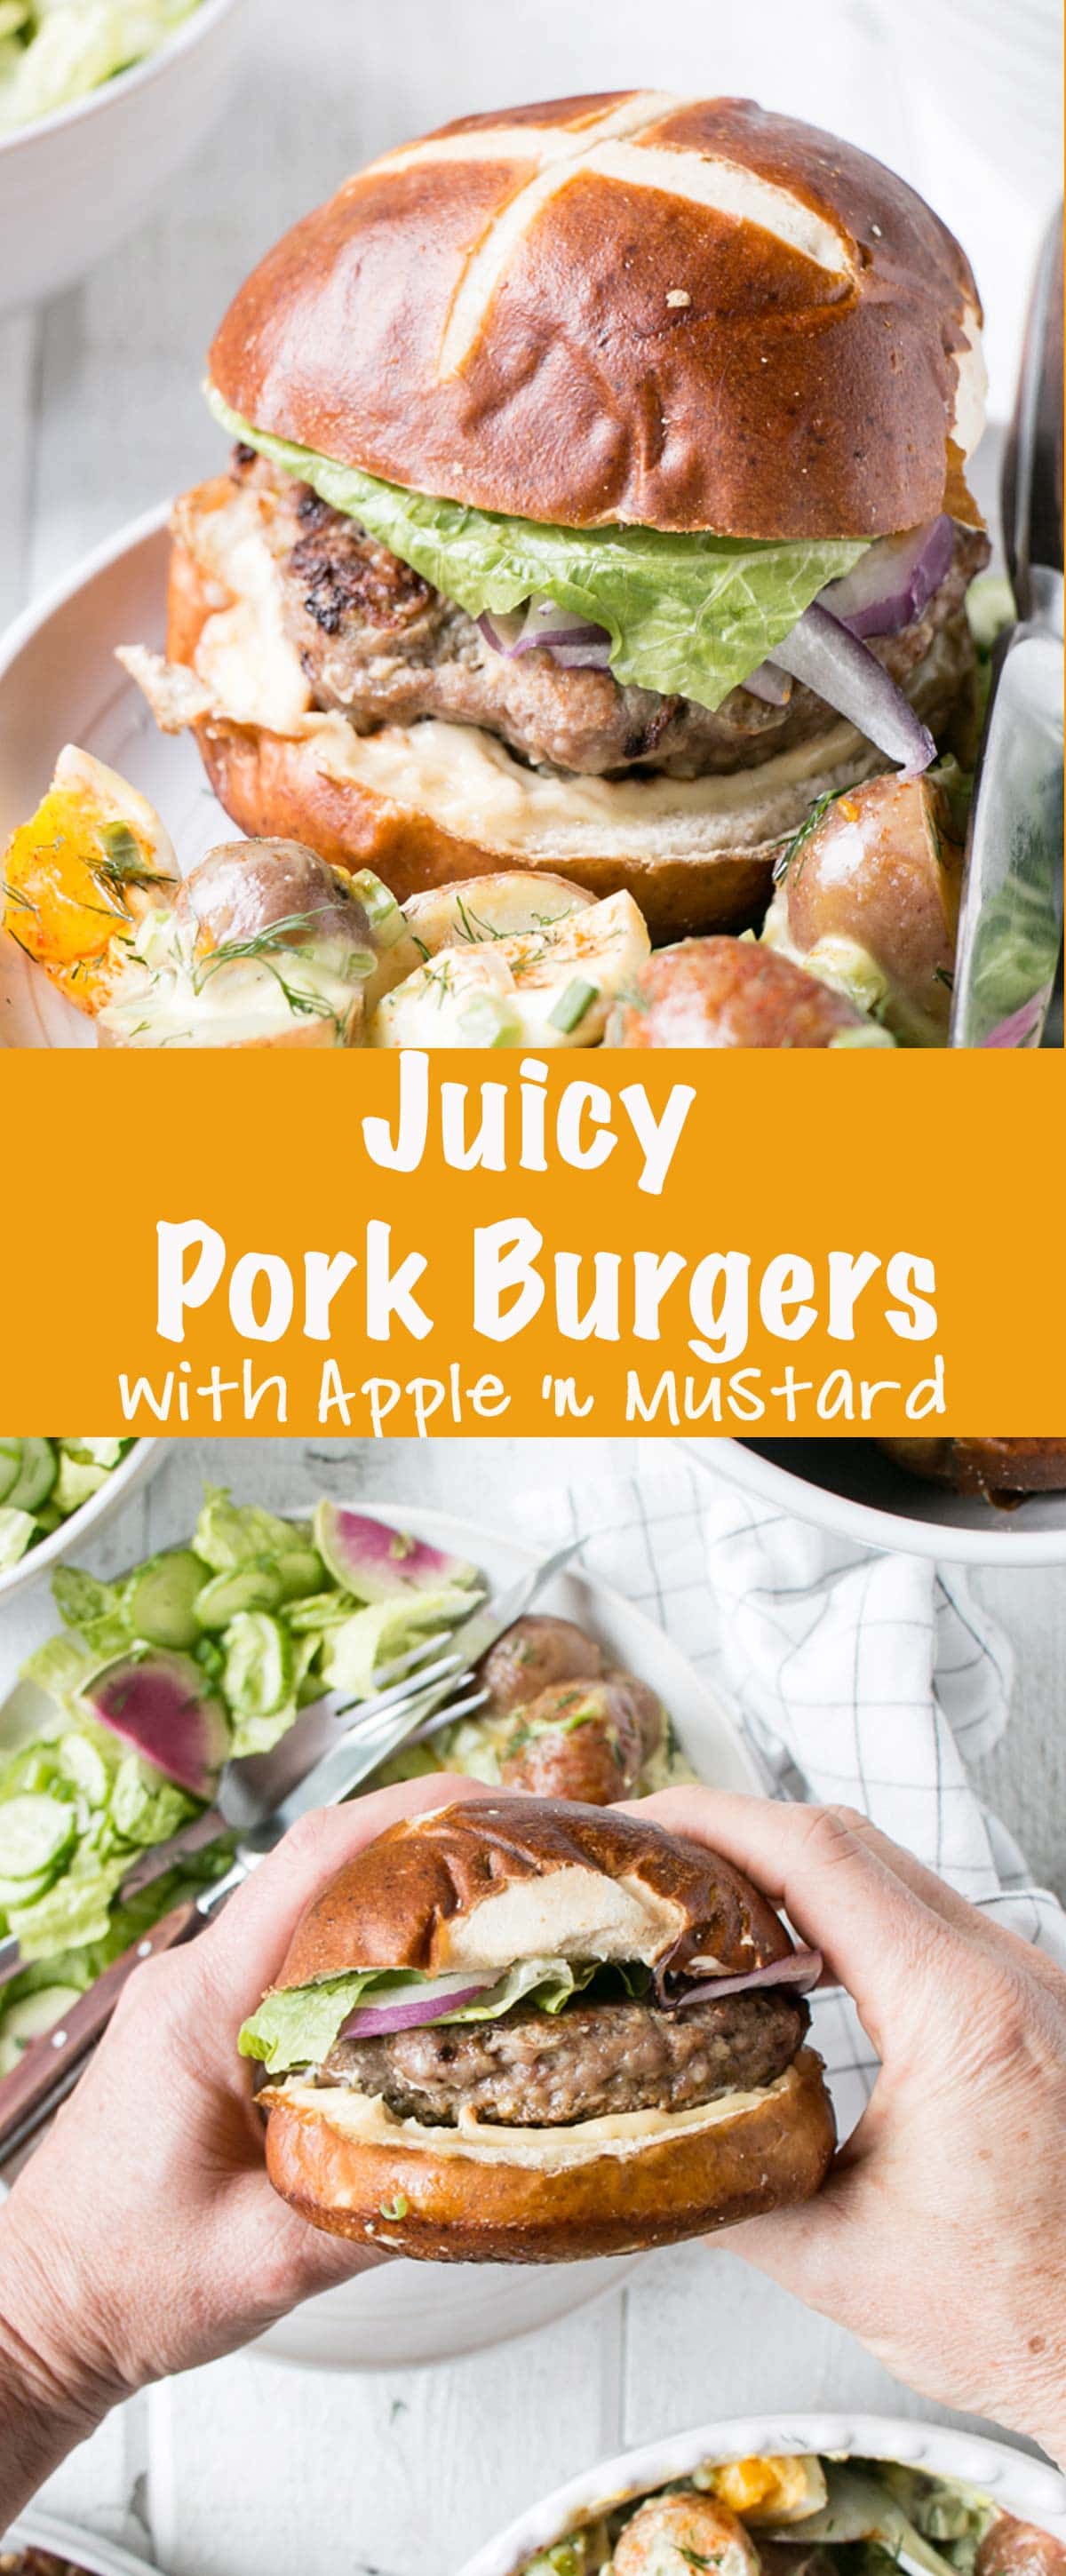 Fire up the grill for these fresh and delicious Apple Mustard Pork Burgers! A juicy, flavourful burger to keep the BBQ running strong all Summer long! via @mykitchenlove